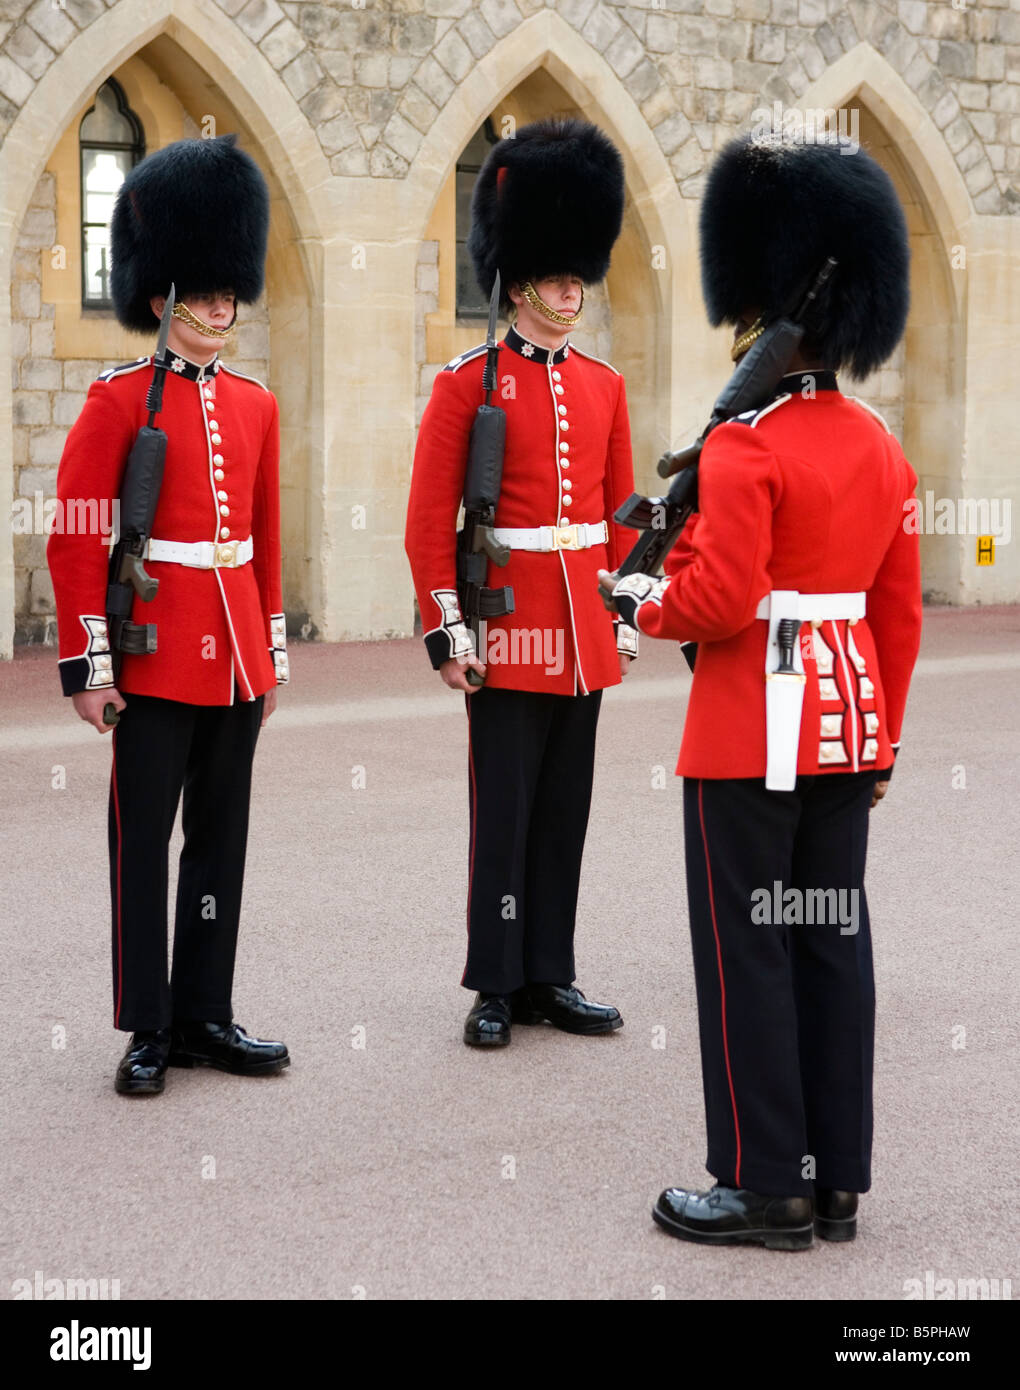 Queens Guard at Windsor Castle, United Kingdom Stock Photo